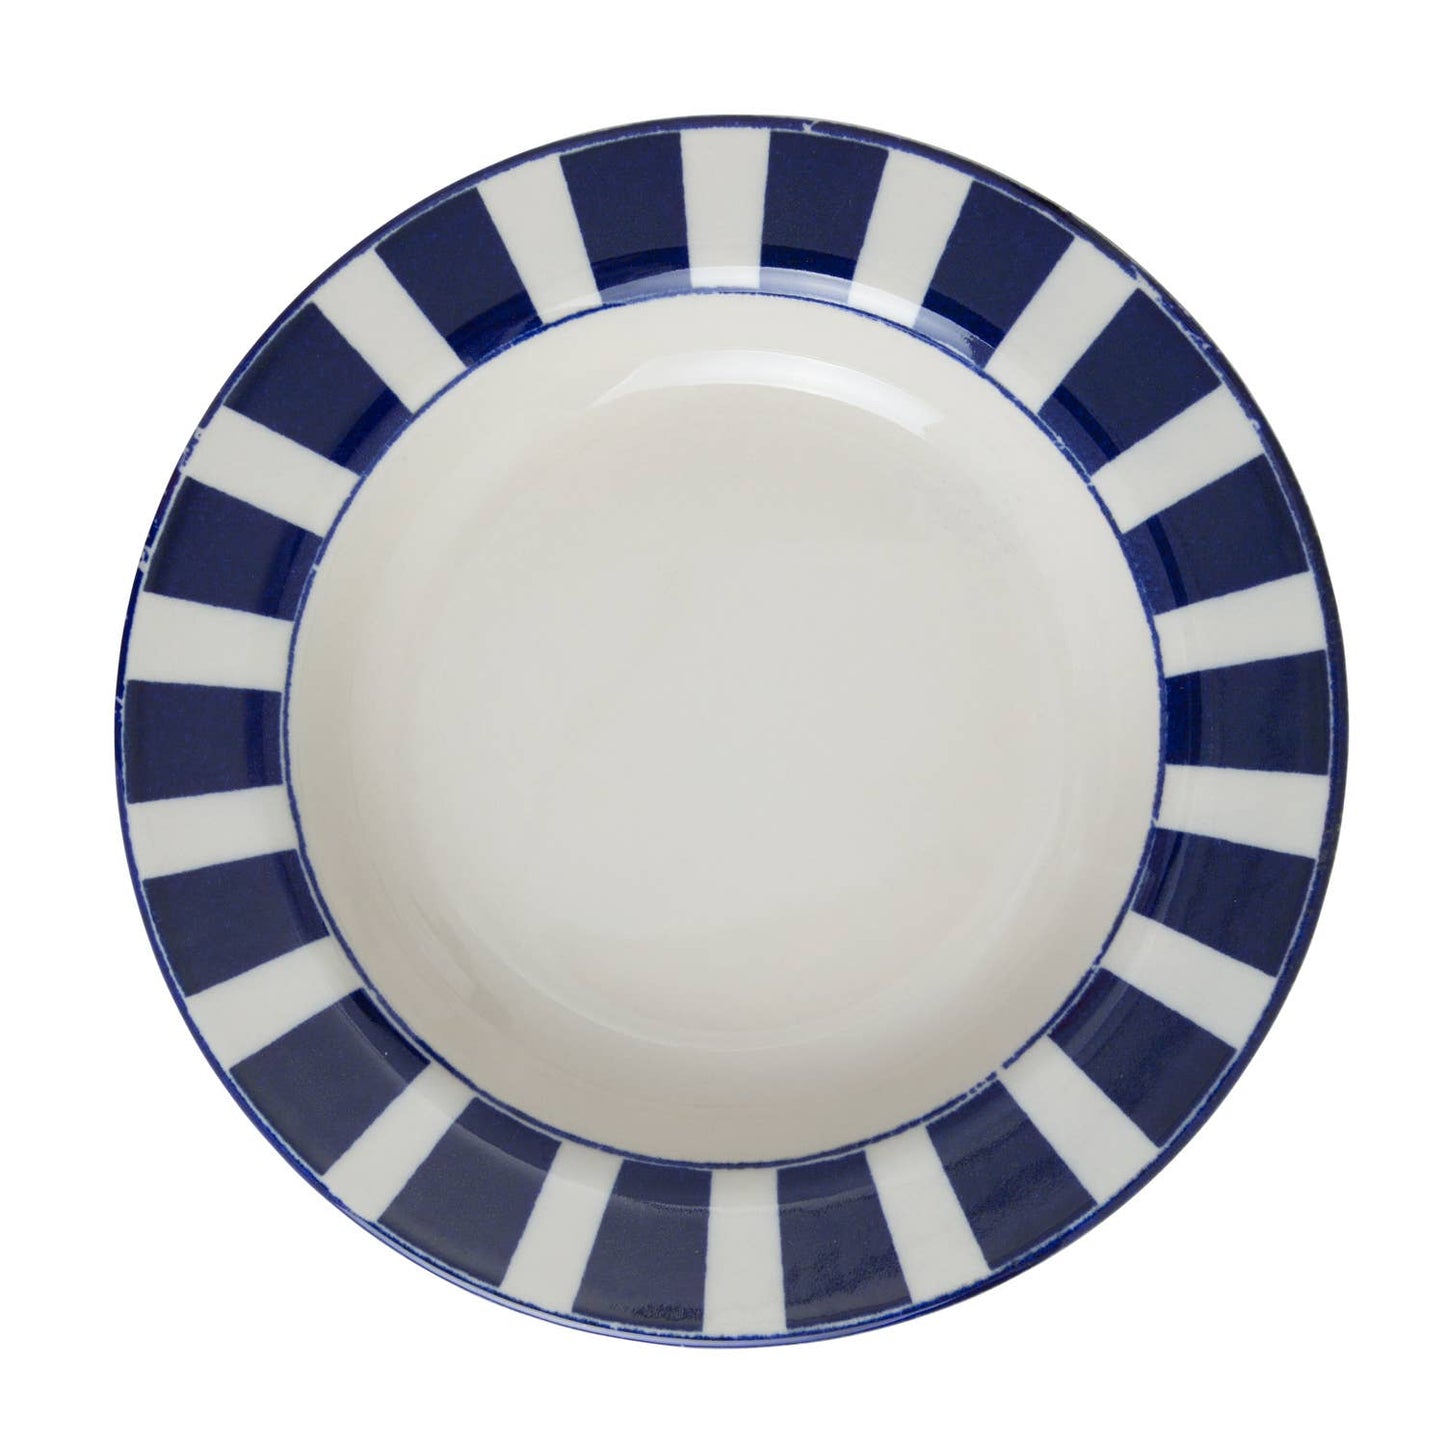 The Lino - Essentials Dinner Plate (Set Of 4) Navy - Fenwick & OliverThe Lino - Essentials Dinner Plate (Set Of 4) NavyThe LinoFenwick & Oliver8400000007481